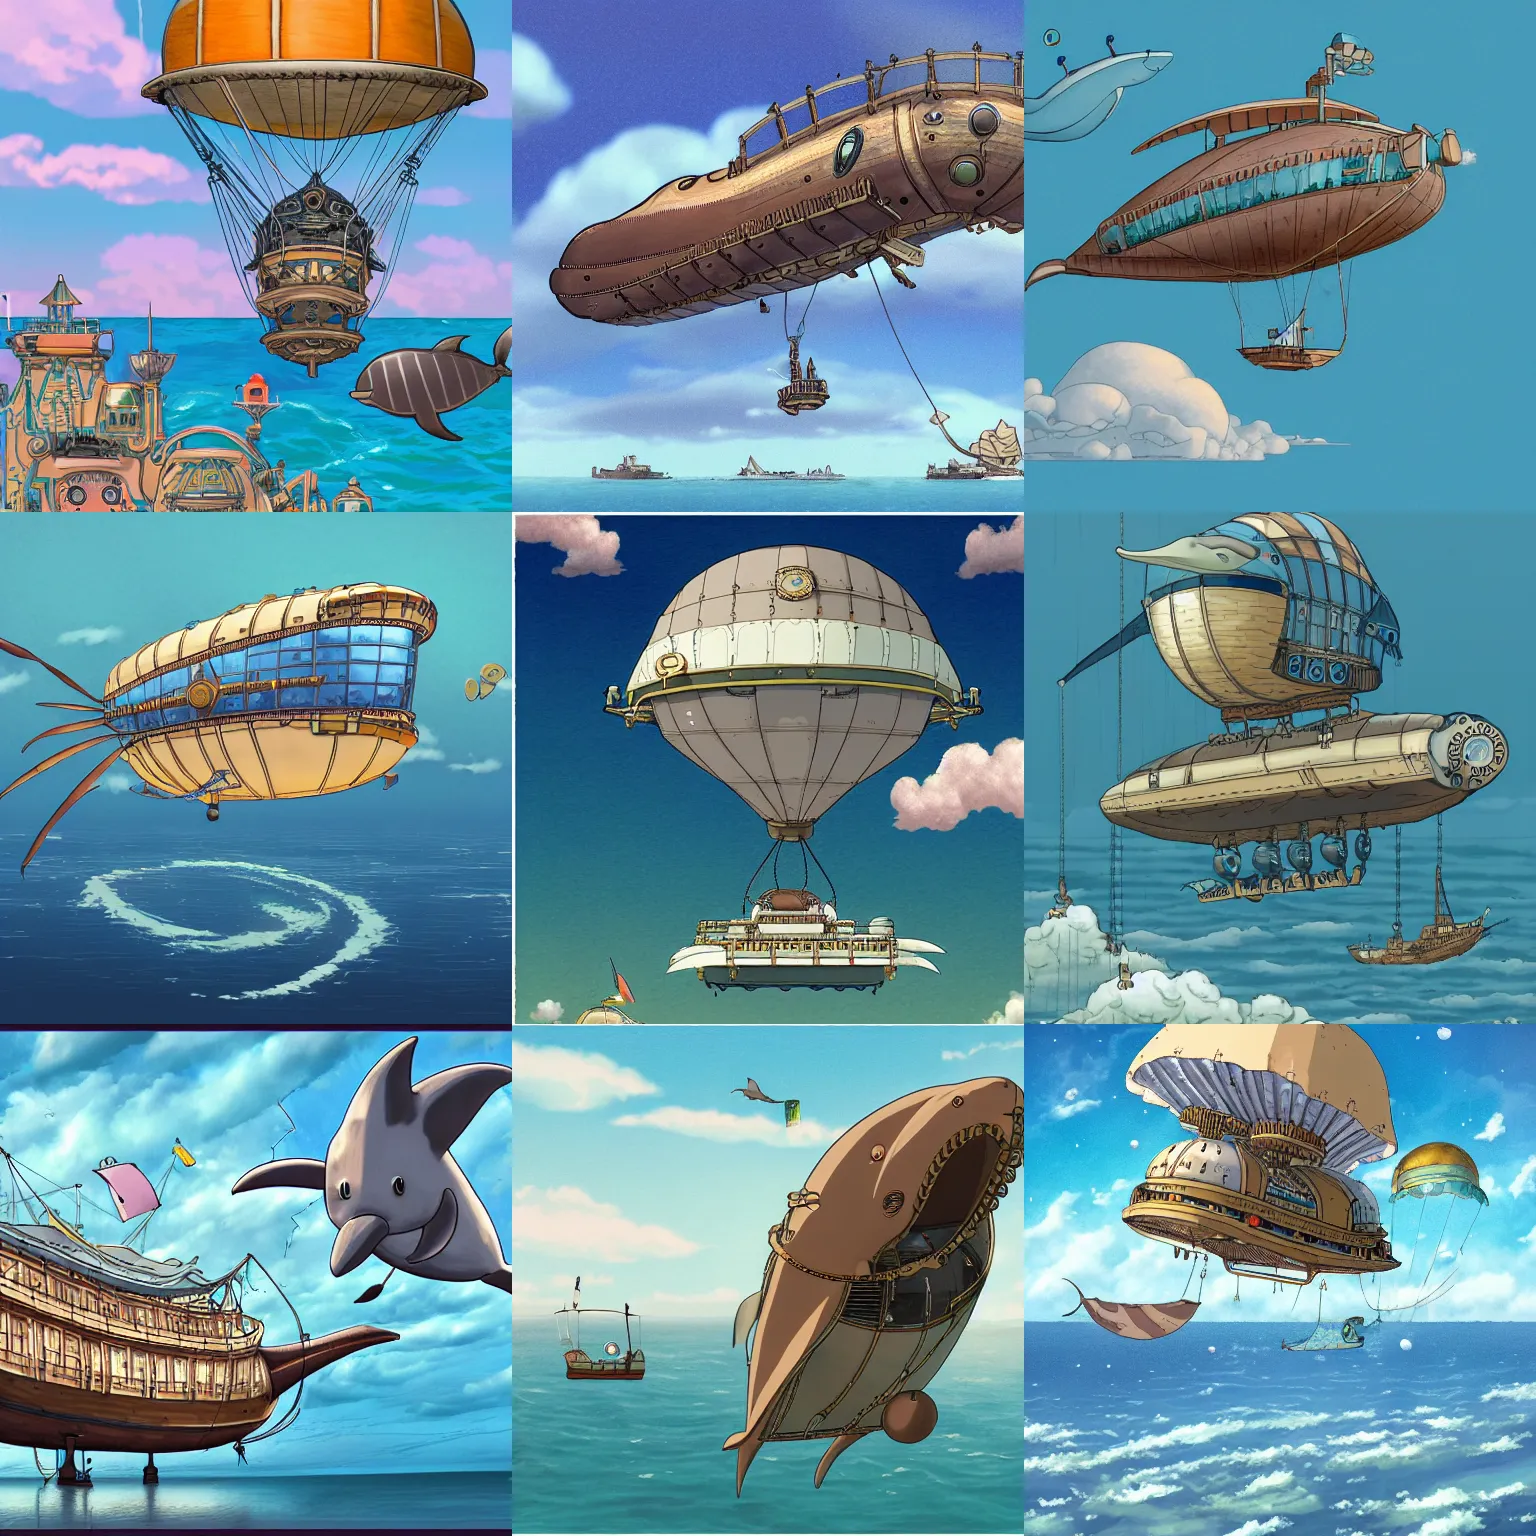 Prompt: a detailed illustration of a dolphin-shaped steampunk airship by the sea in the style of Ghibli, 8k